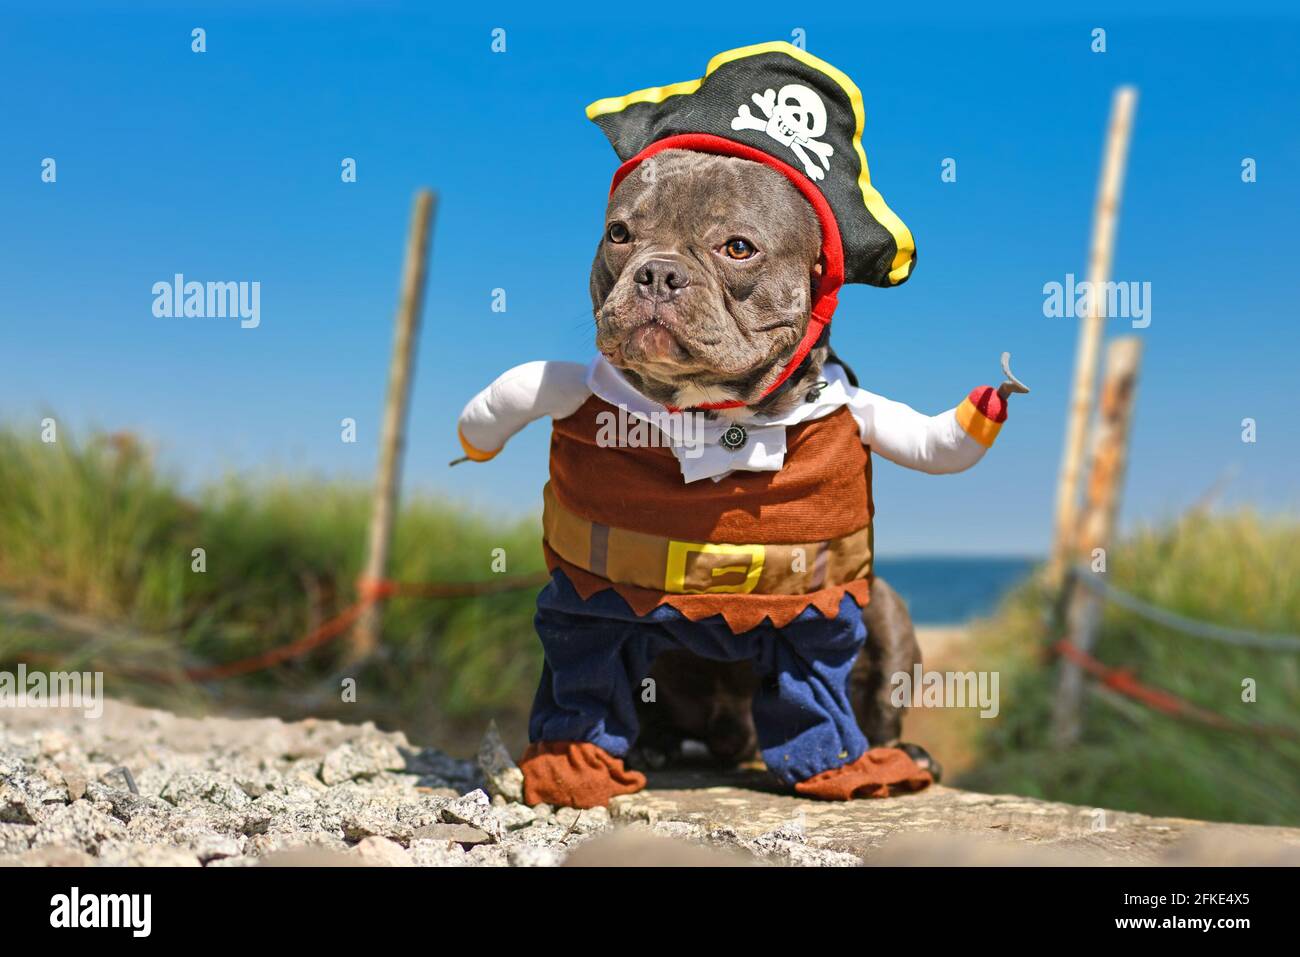 French Bulldog dog dressed up in pirate costume with hat and hook arm standing at beach Stock Photo